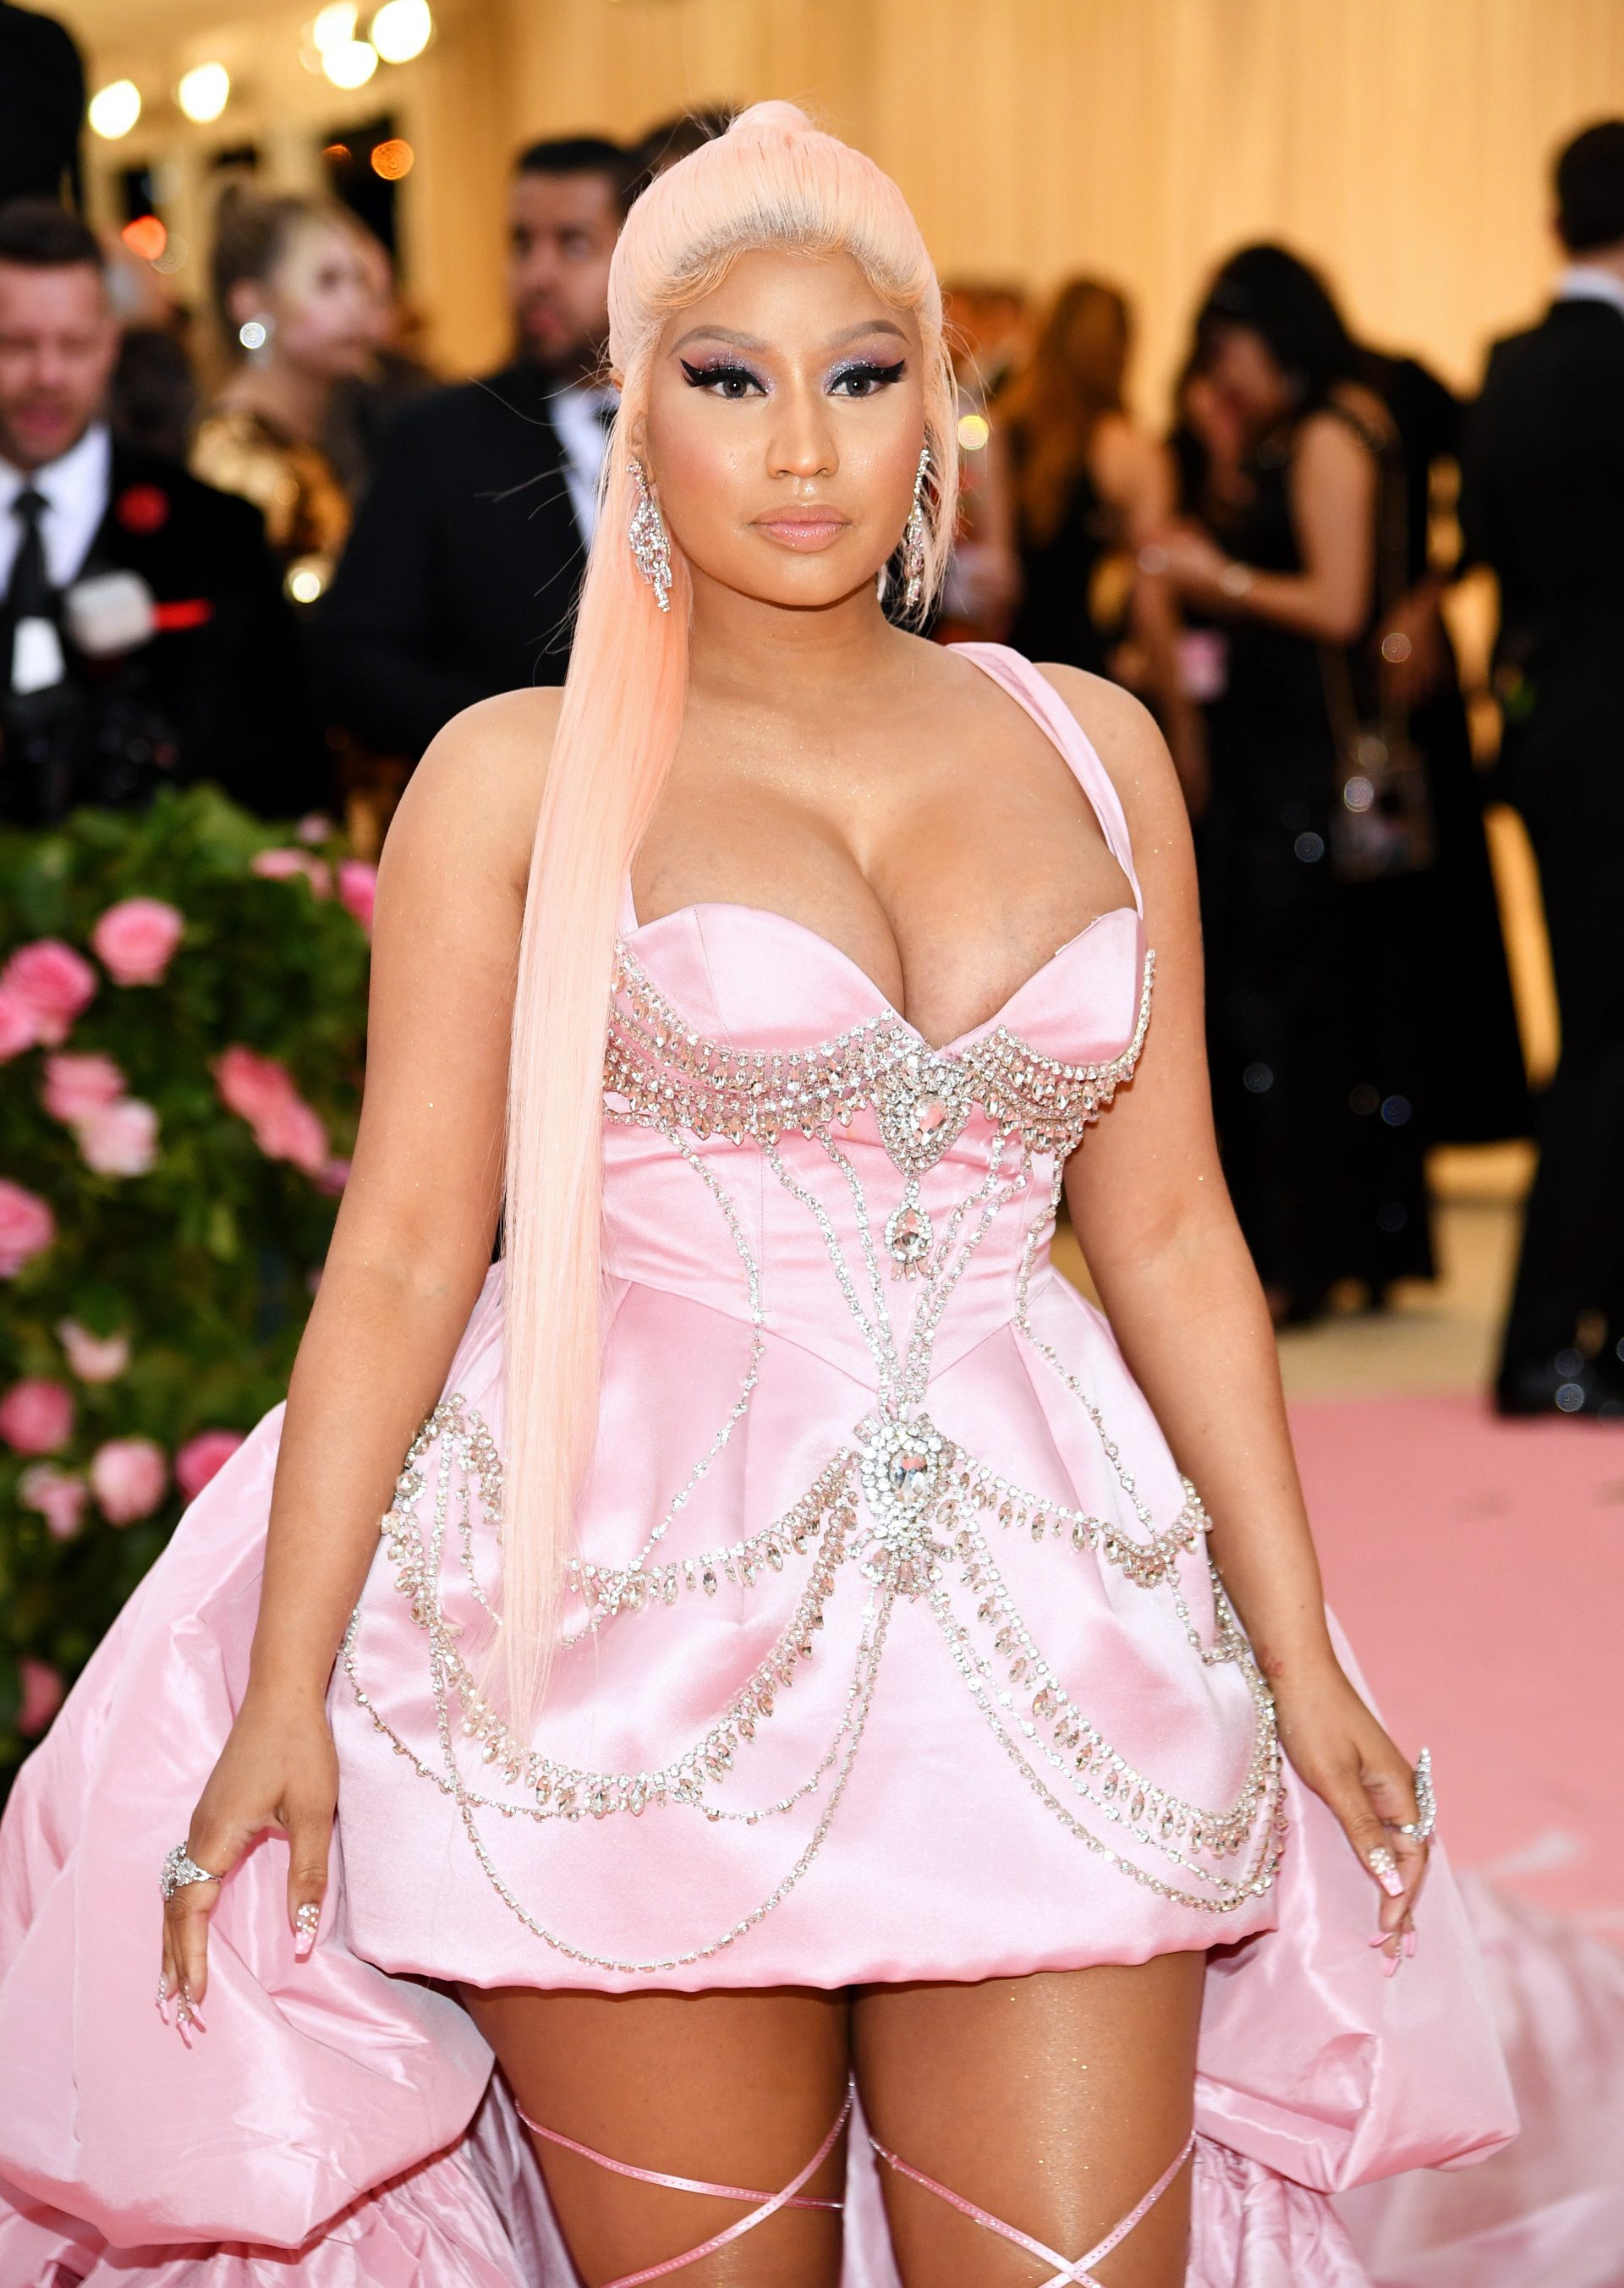 Nicki Minaj Upright Shared the First Pictures of Her Minute one Son’s Face